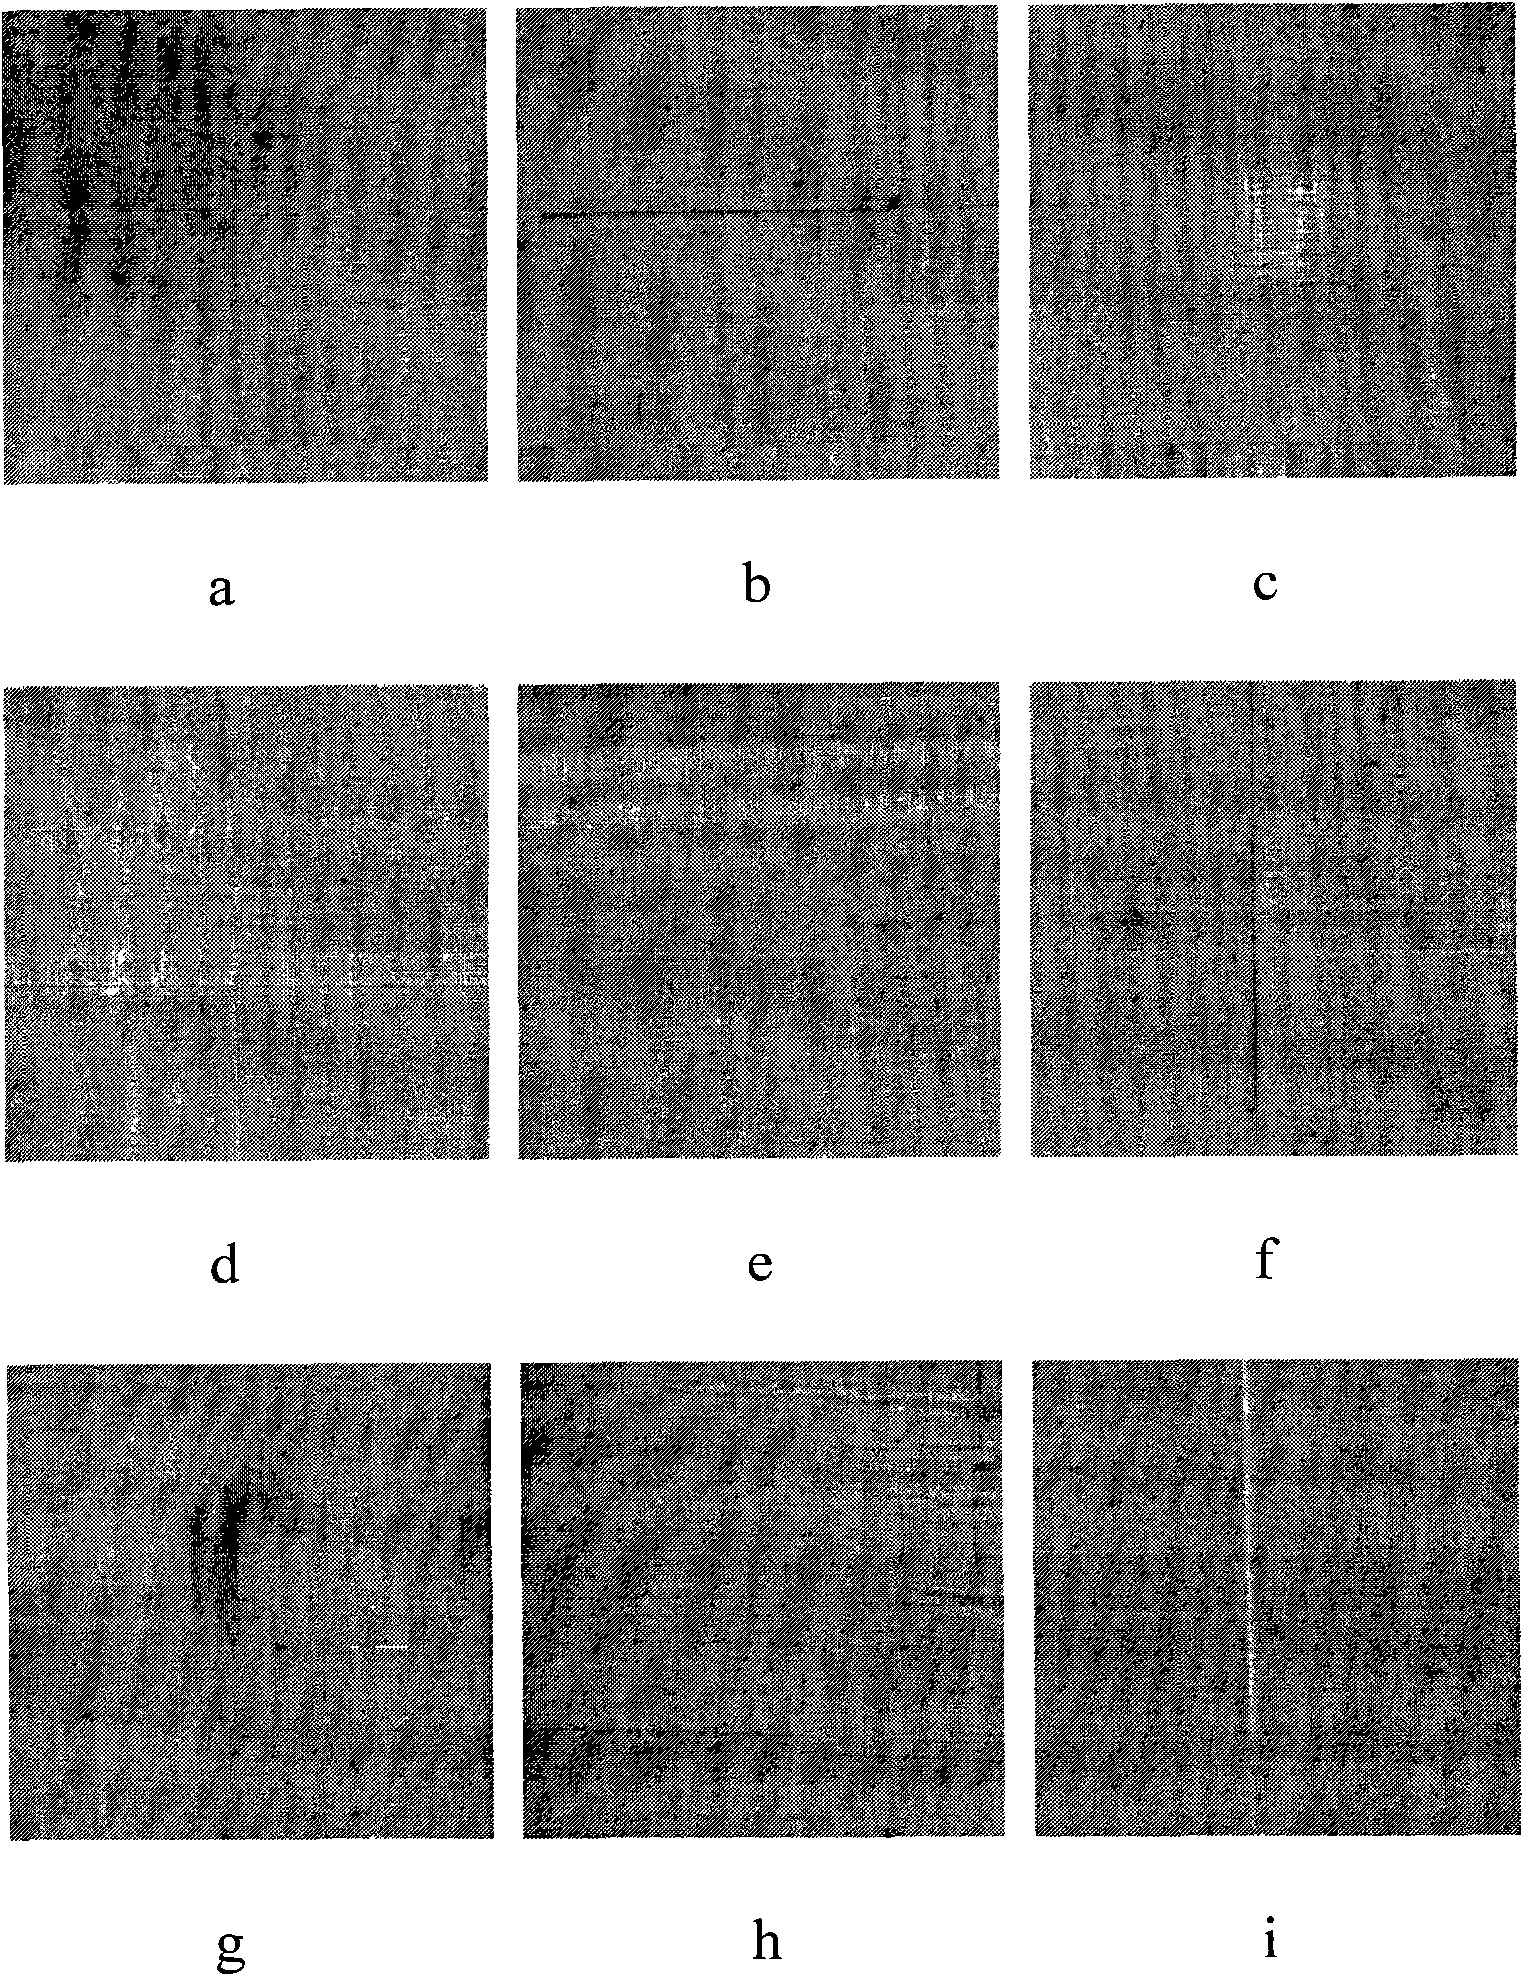 Method for detecting and classifying fabric defects